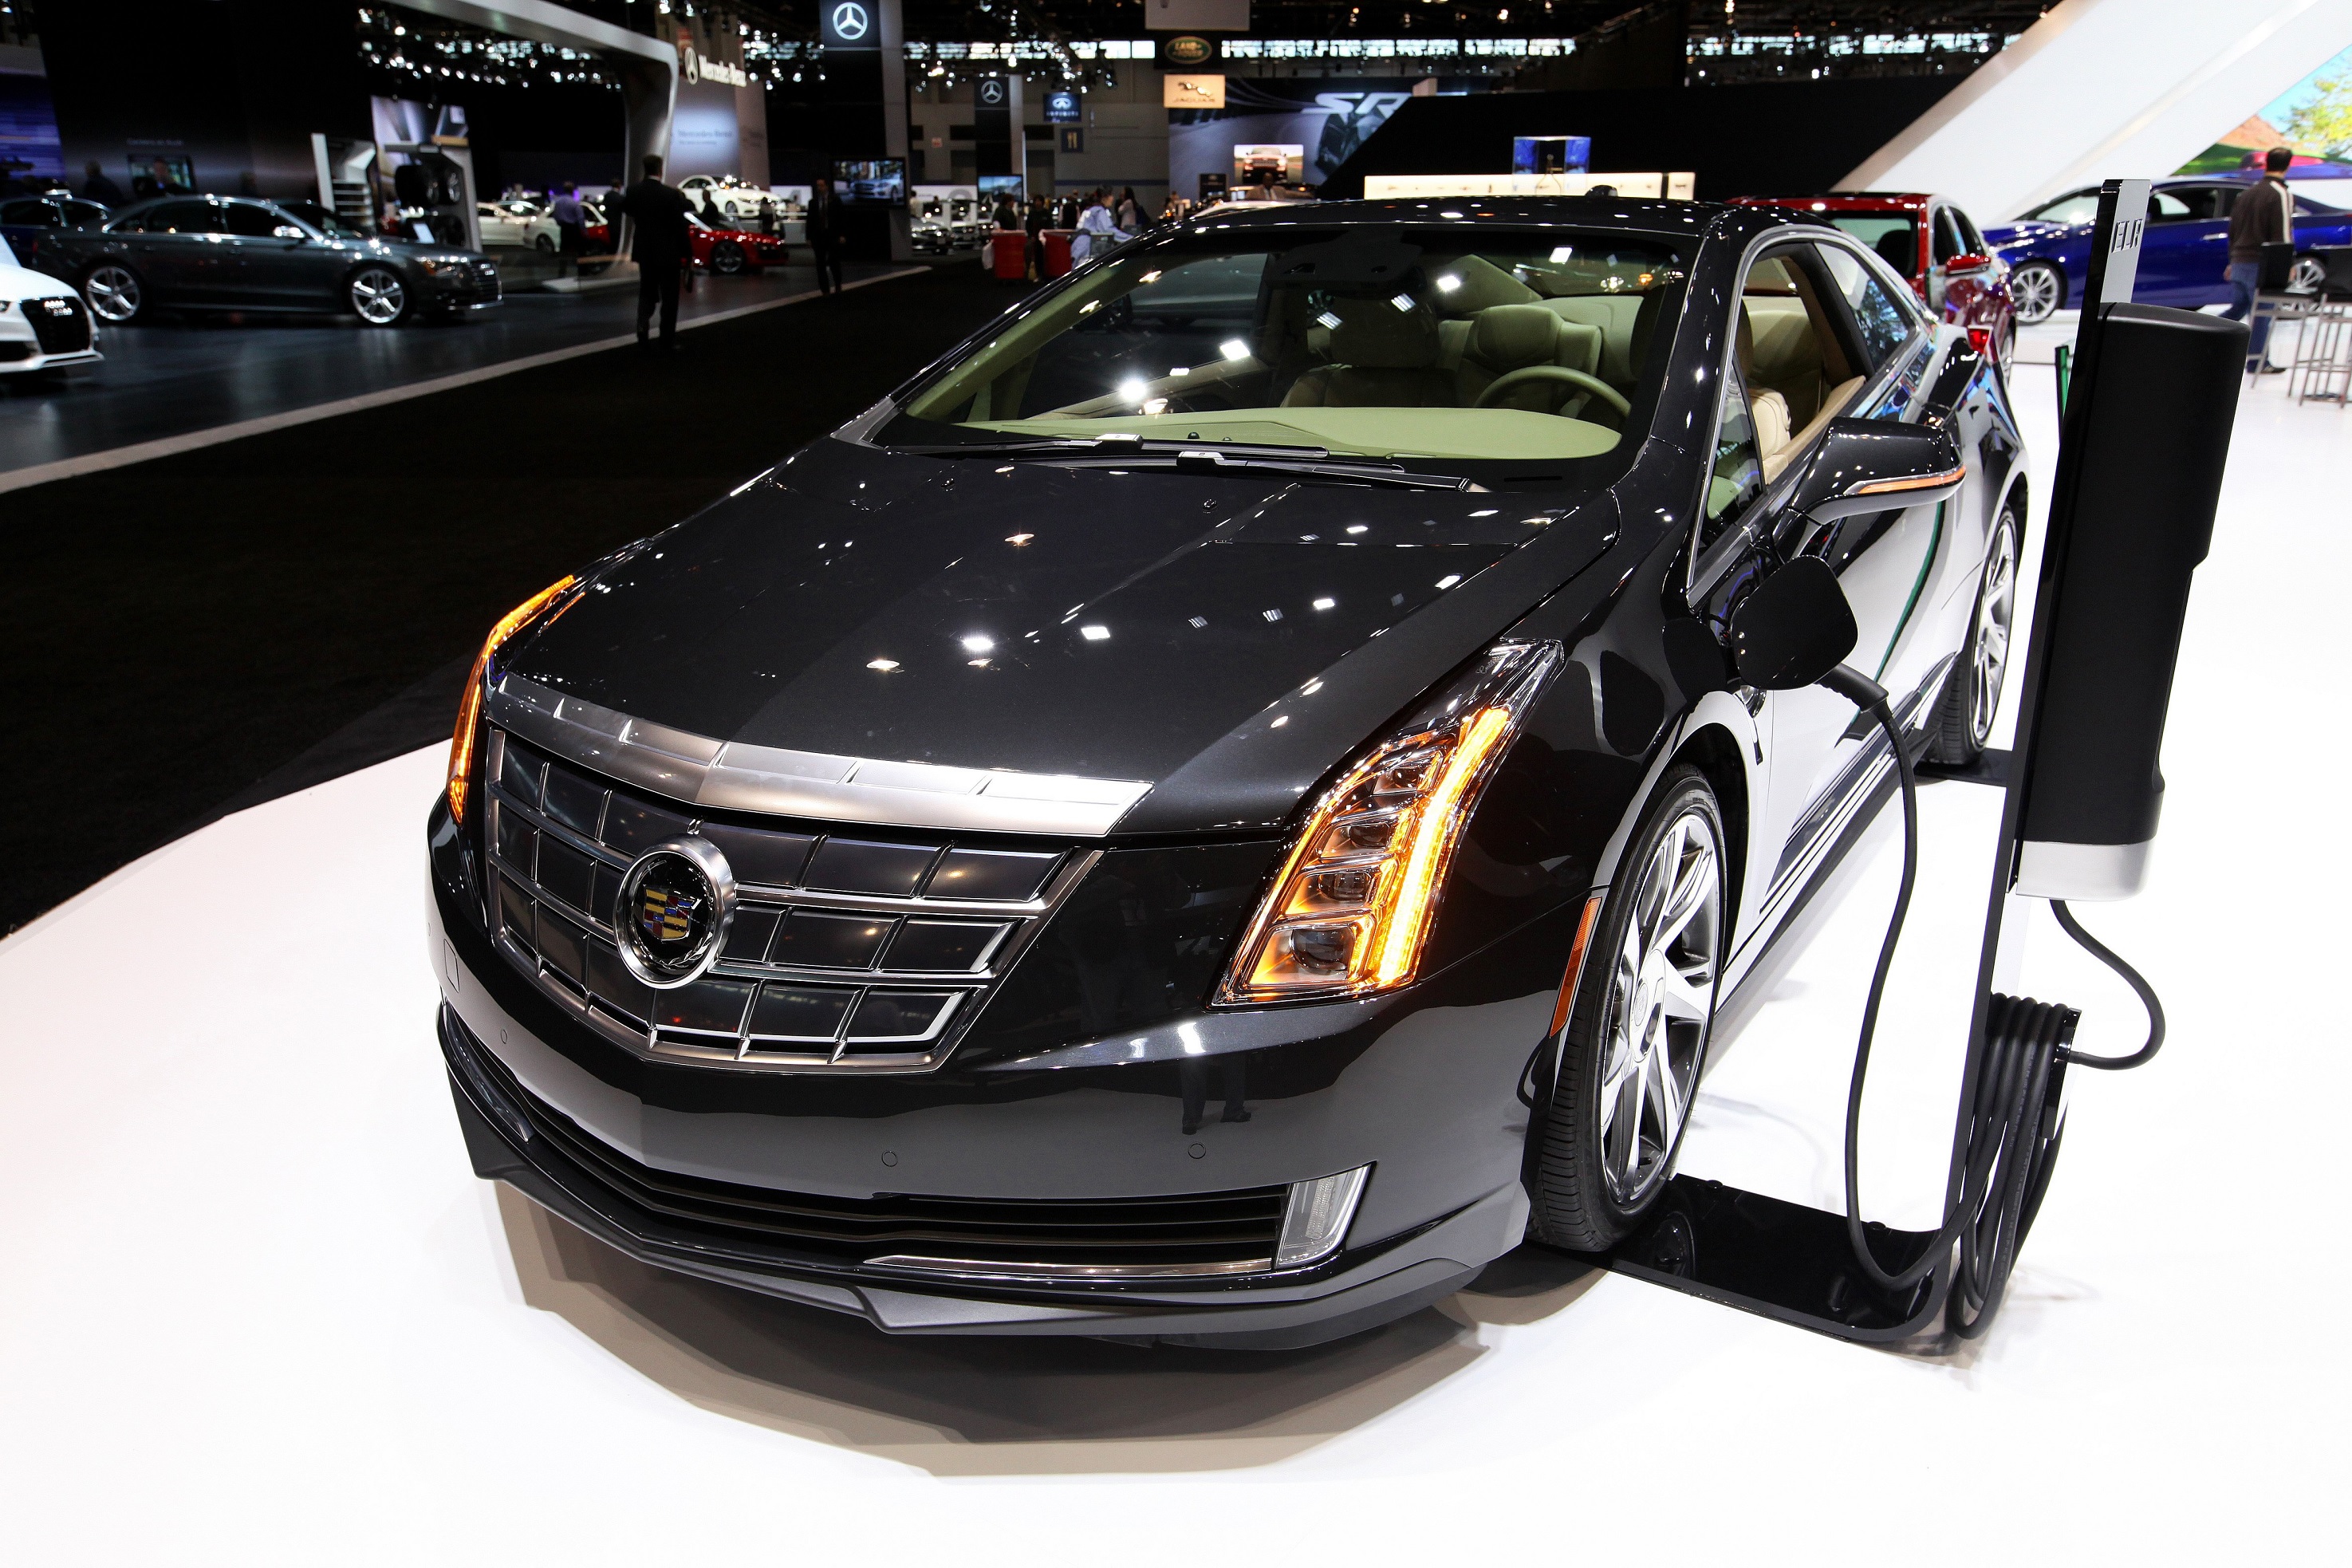 A black 2014 Cadillac ELR charging at the 2014 Chicago Auto Show